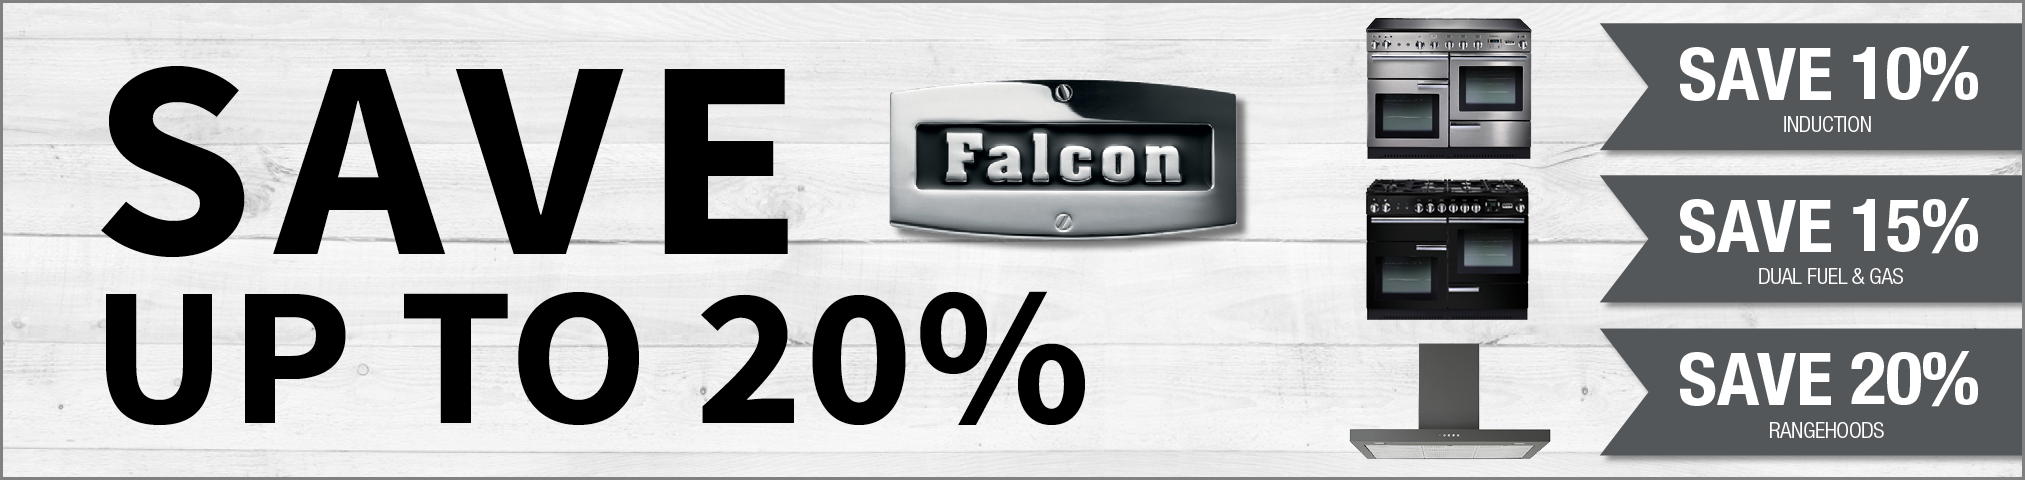 Save Up To 20%* On Falcon Appliances